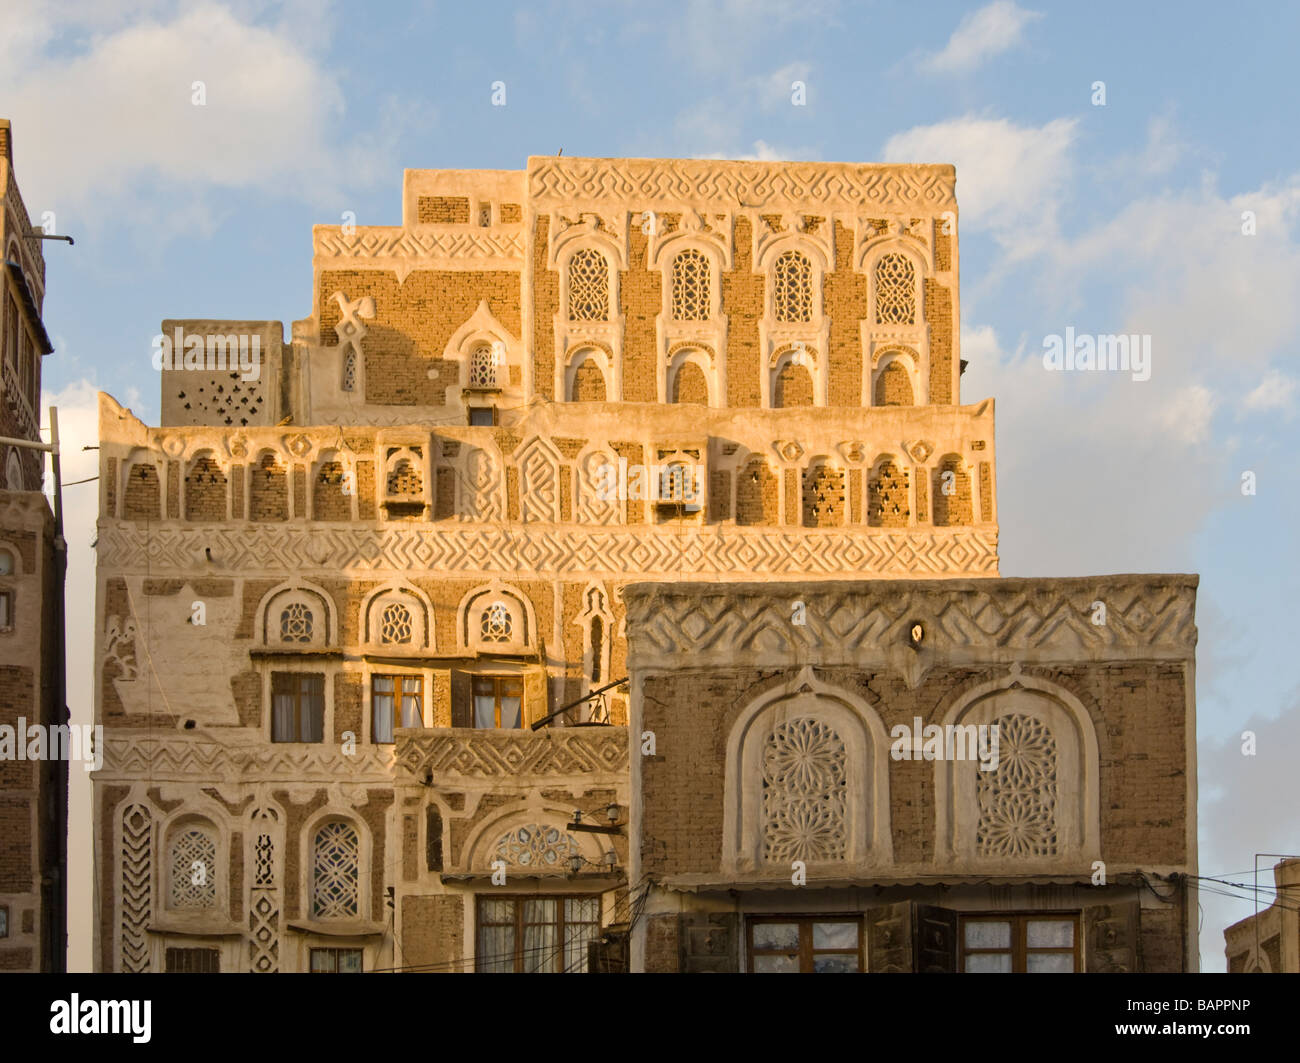 Traditional building in the old town district of Sana'a Yemen Stock Photo